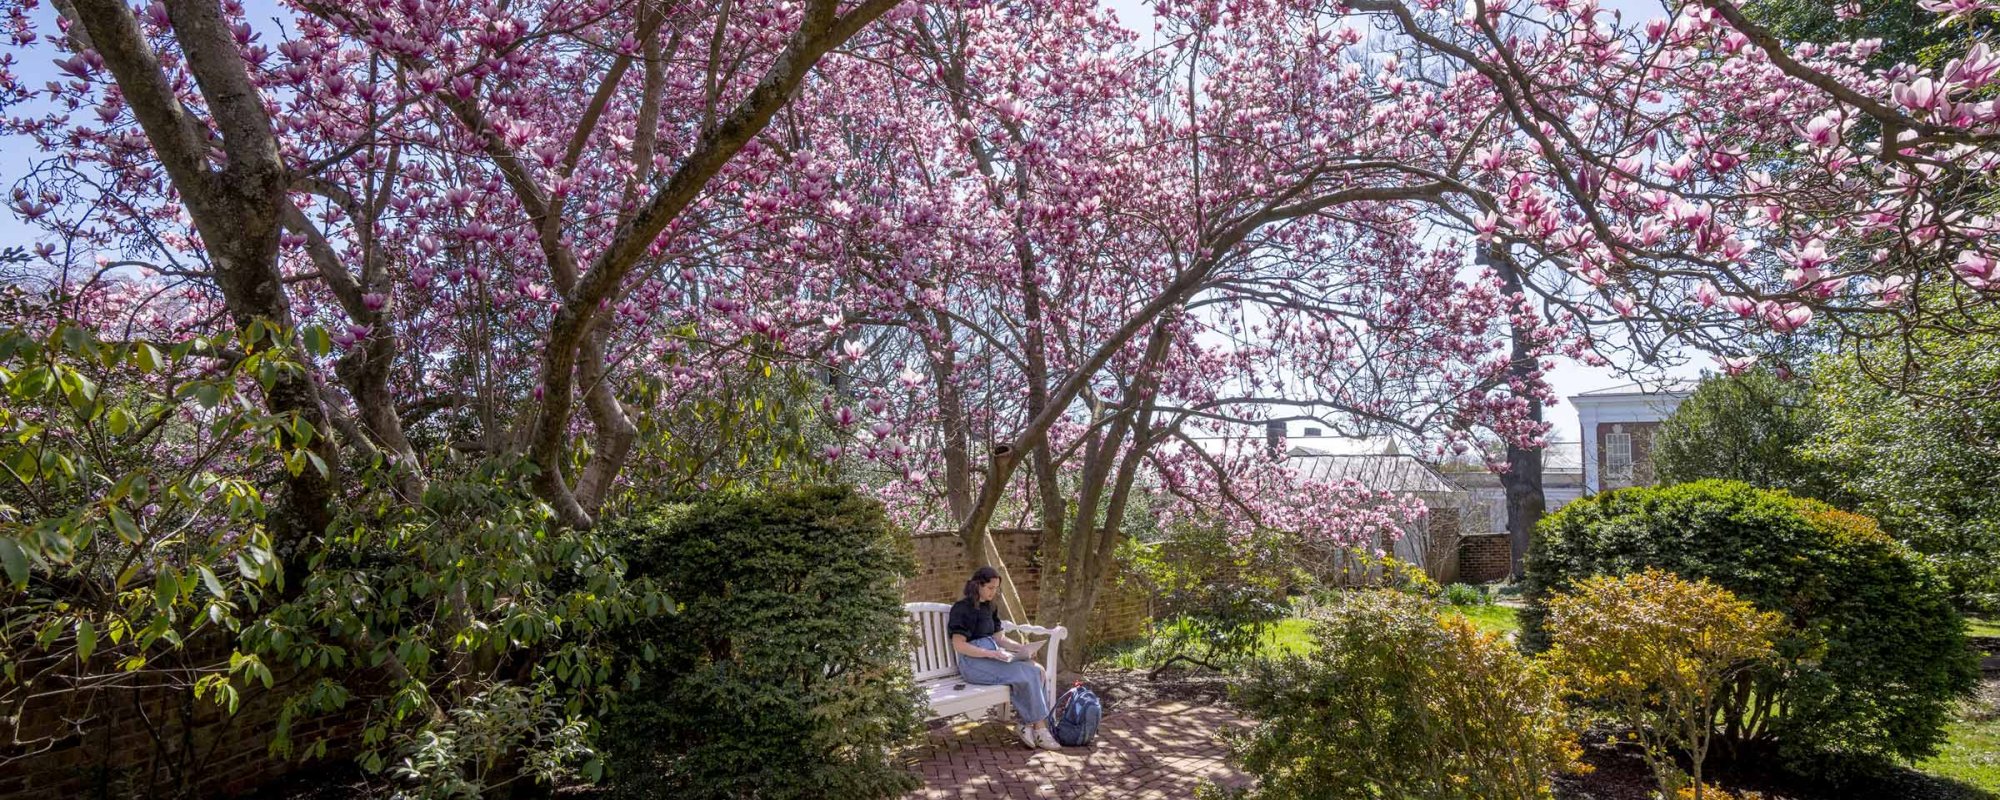 Student on bench in garden with tree with pink blooms behind them